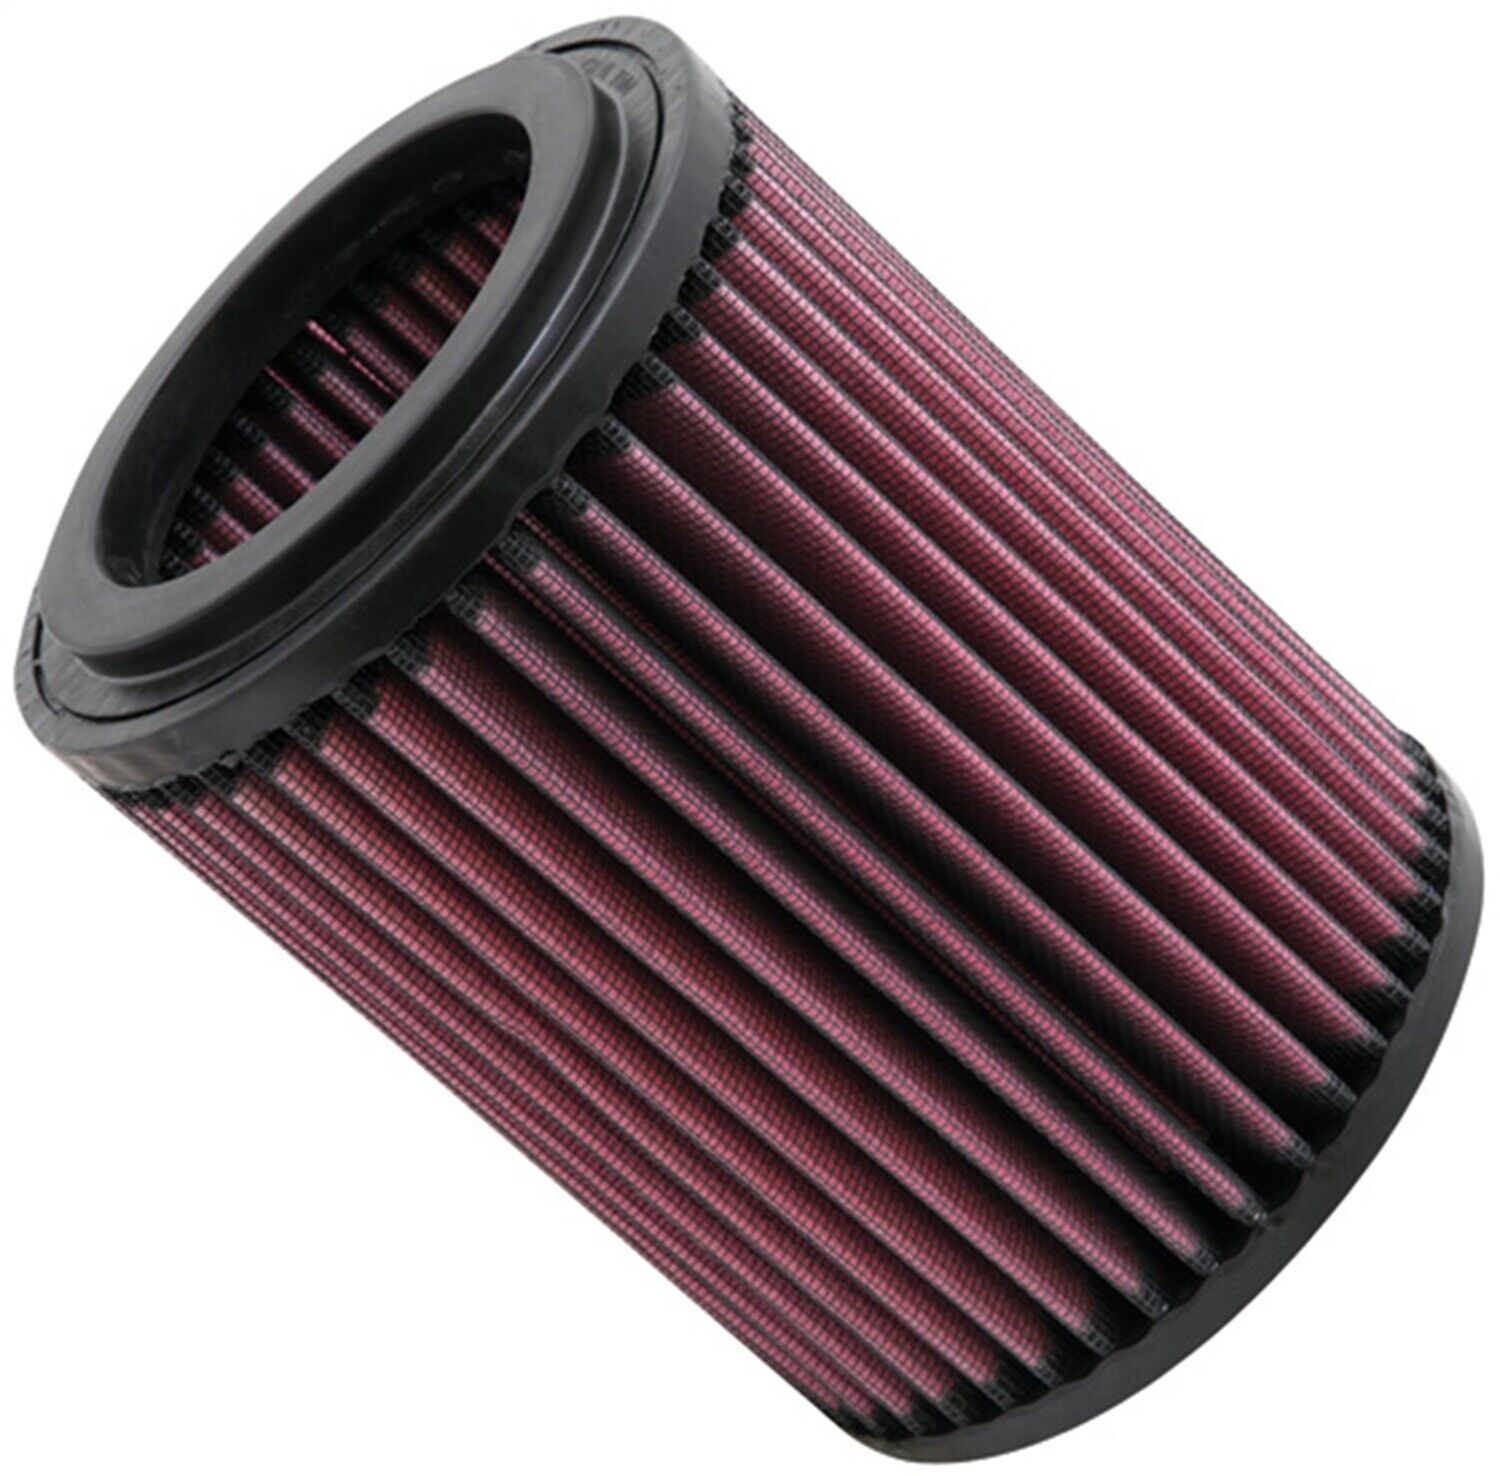 K&N Filters E-2429 Air Filter Fits 02-06 Civic CR-V RSX